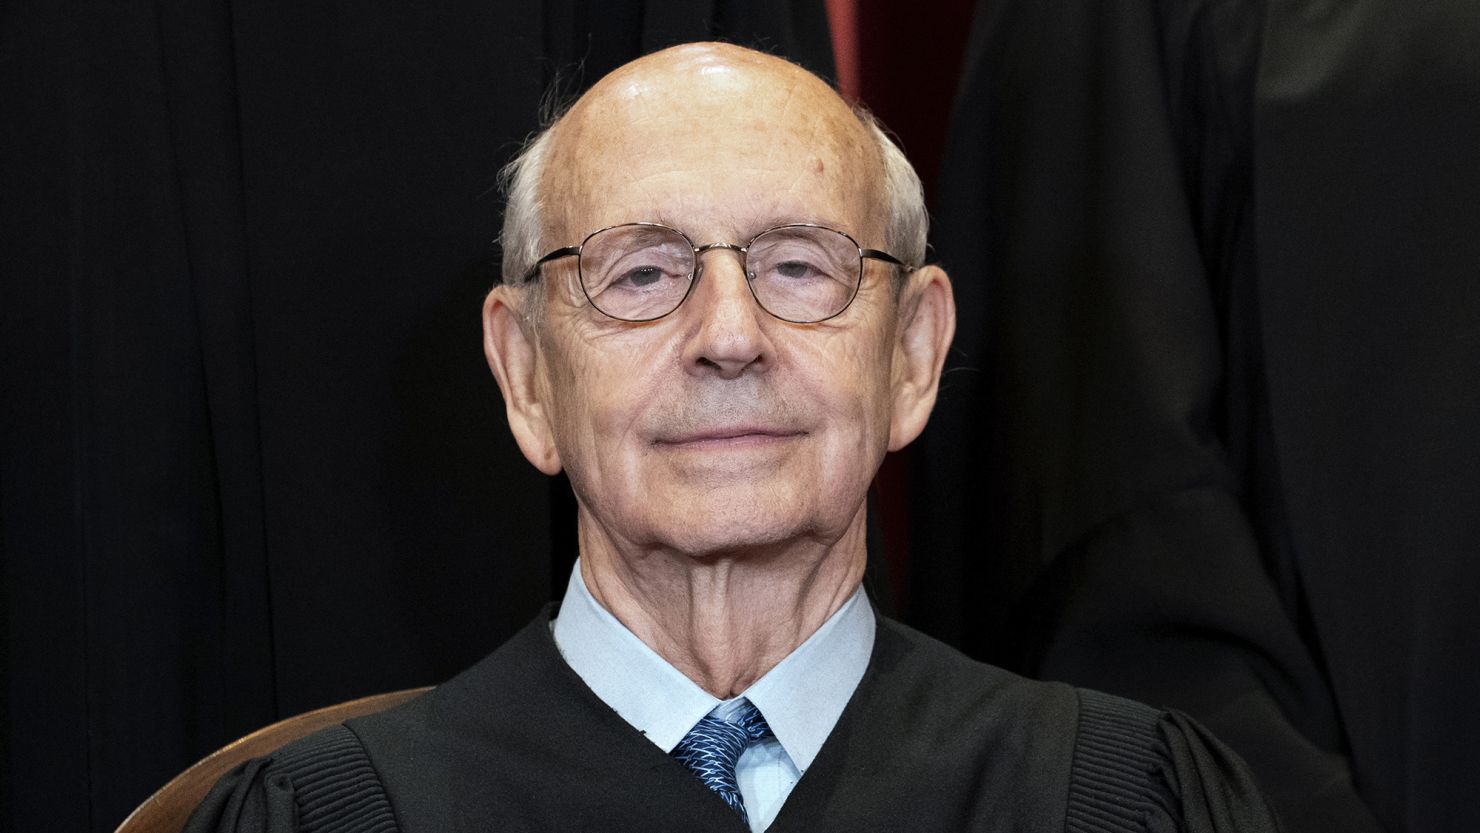 Associate Justice Stephen Breyer sits during a group photo at the Supreme Court in Washington, Friday, April 23, 2021.